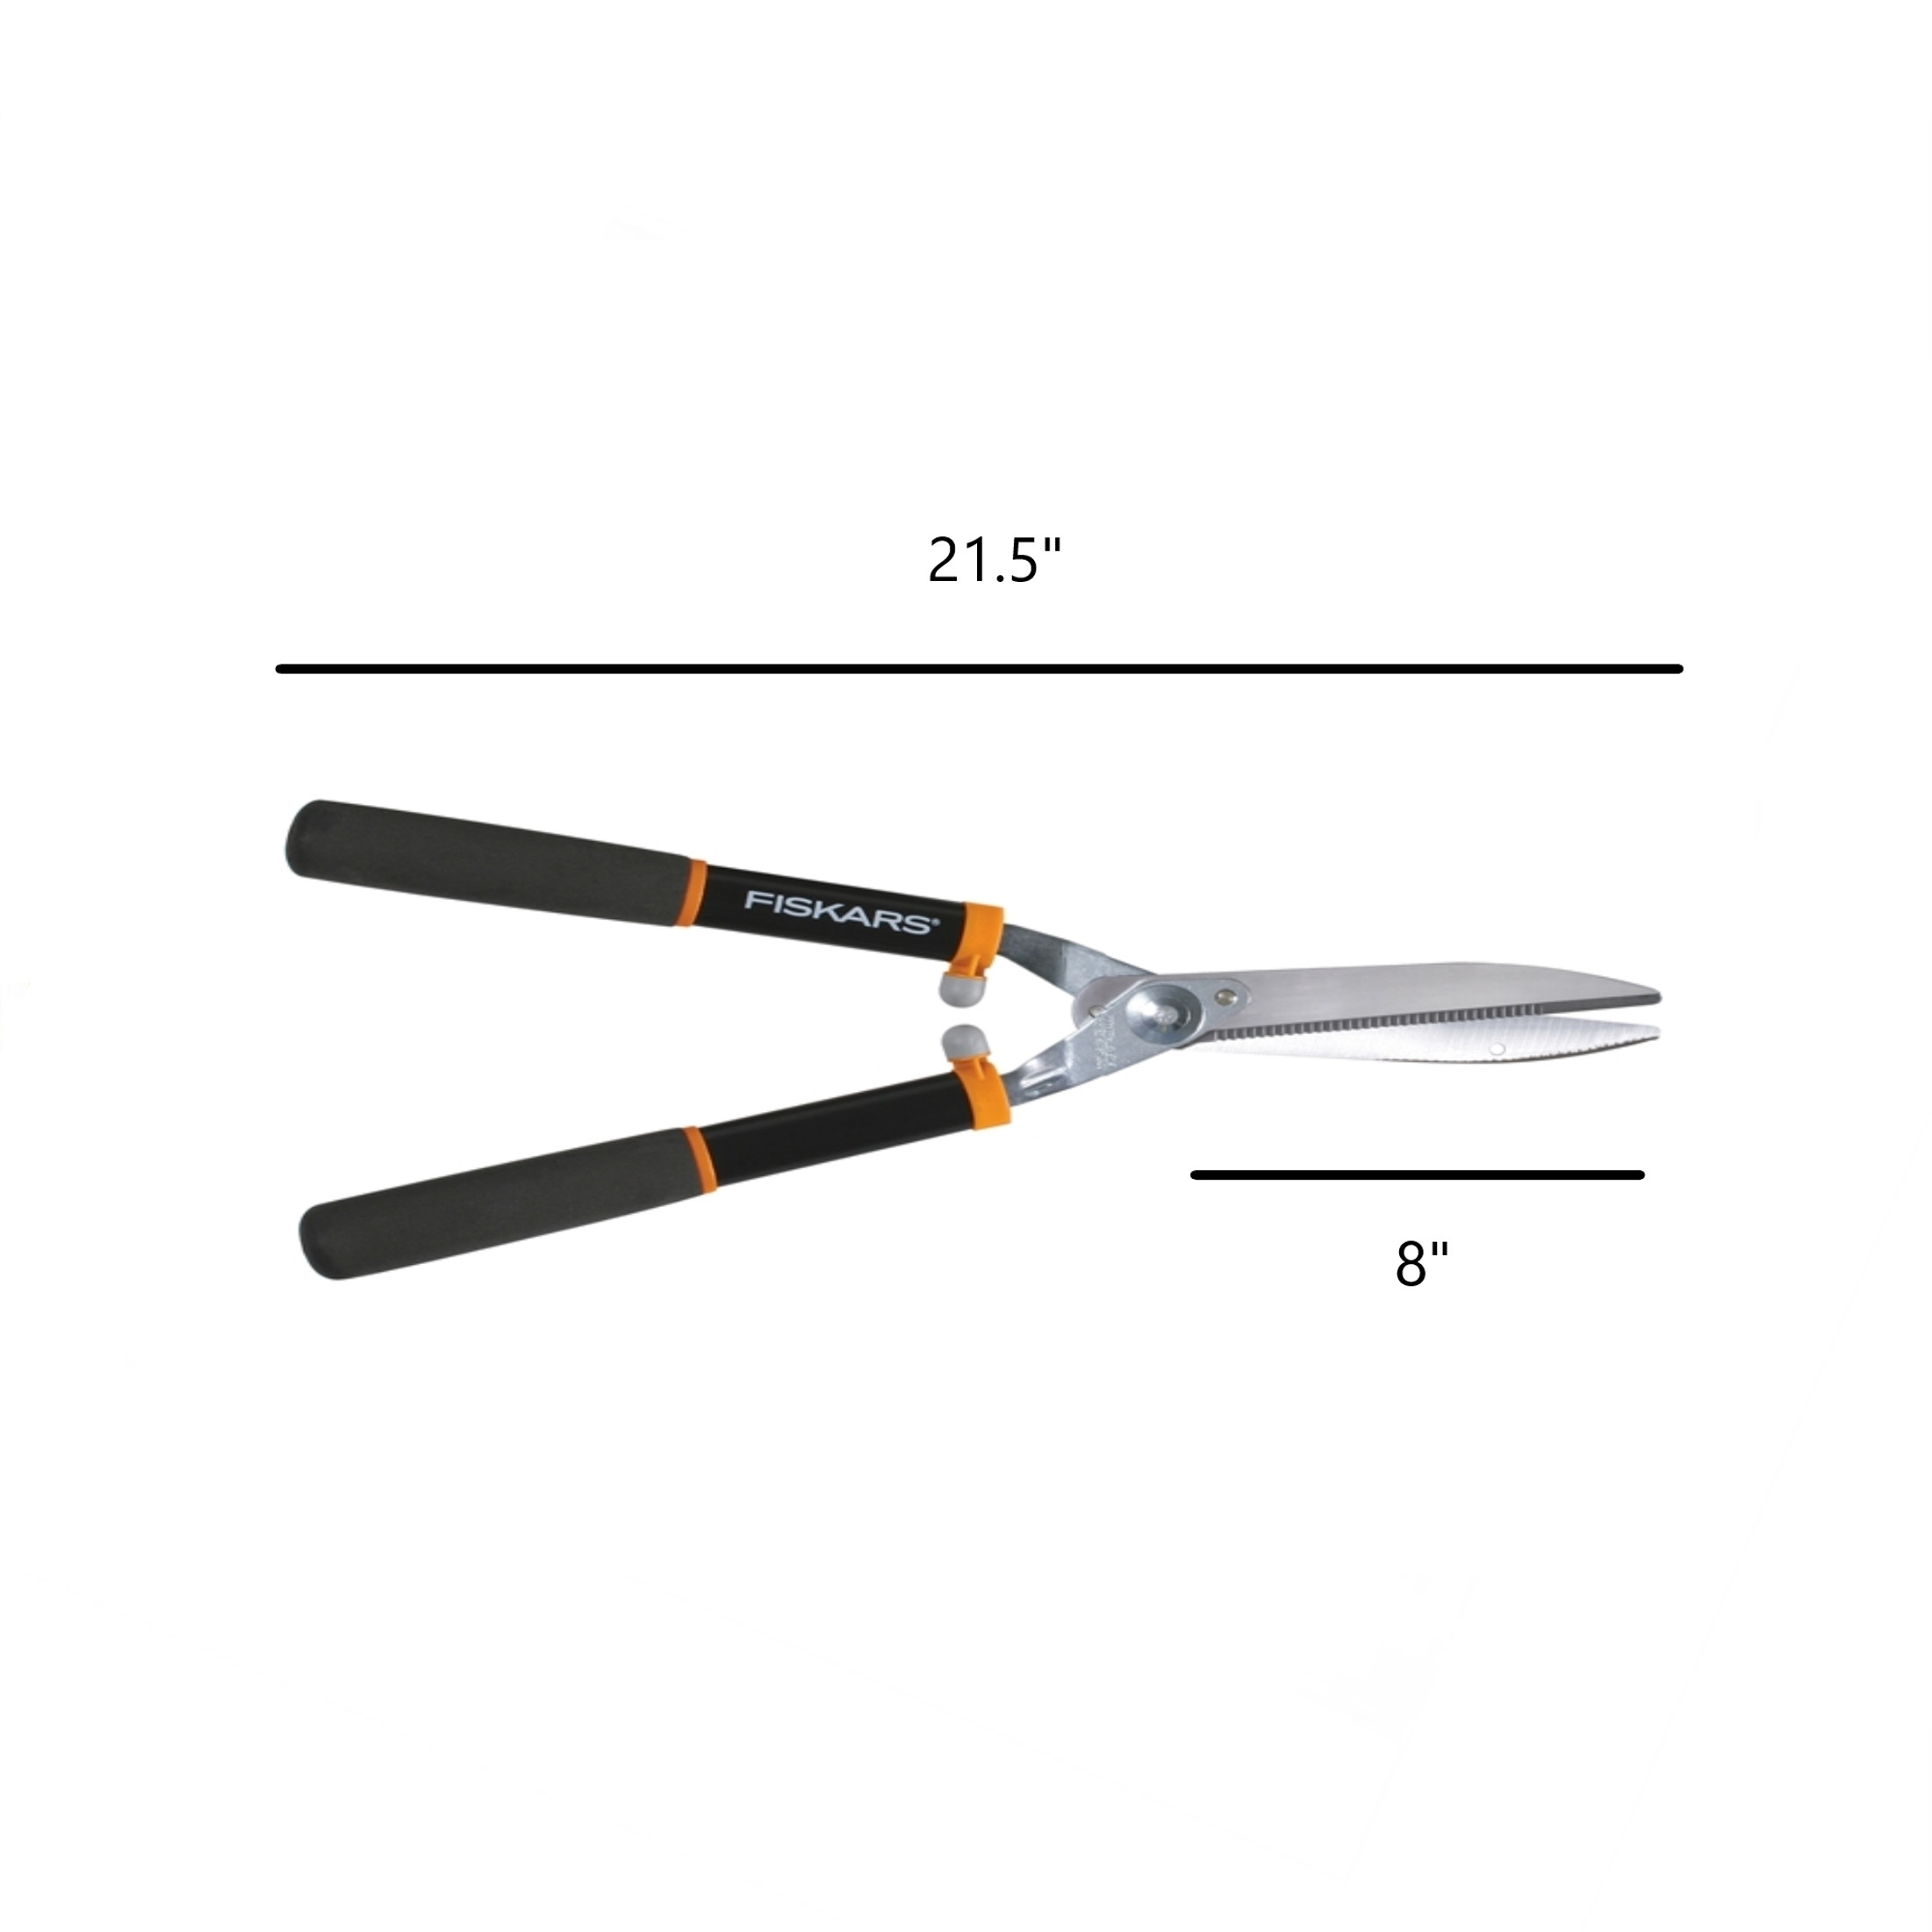 Fiskars Power Lever Hedge Shears With Soft Grip Handle, 8-Inch Blade